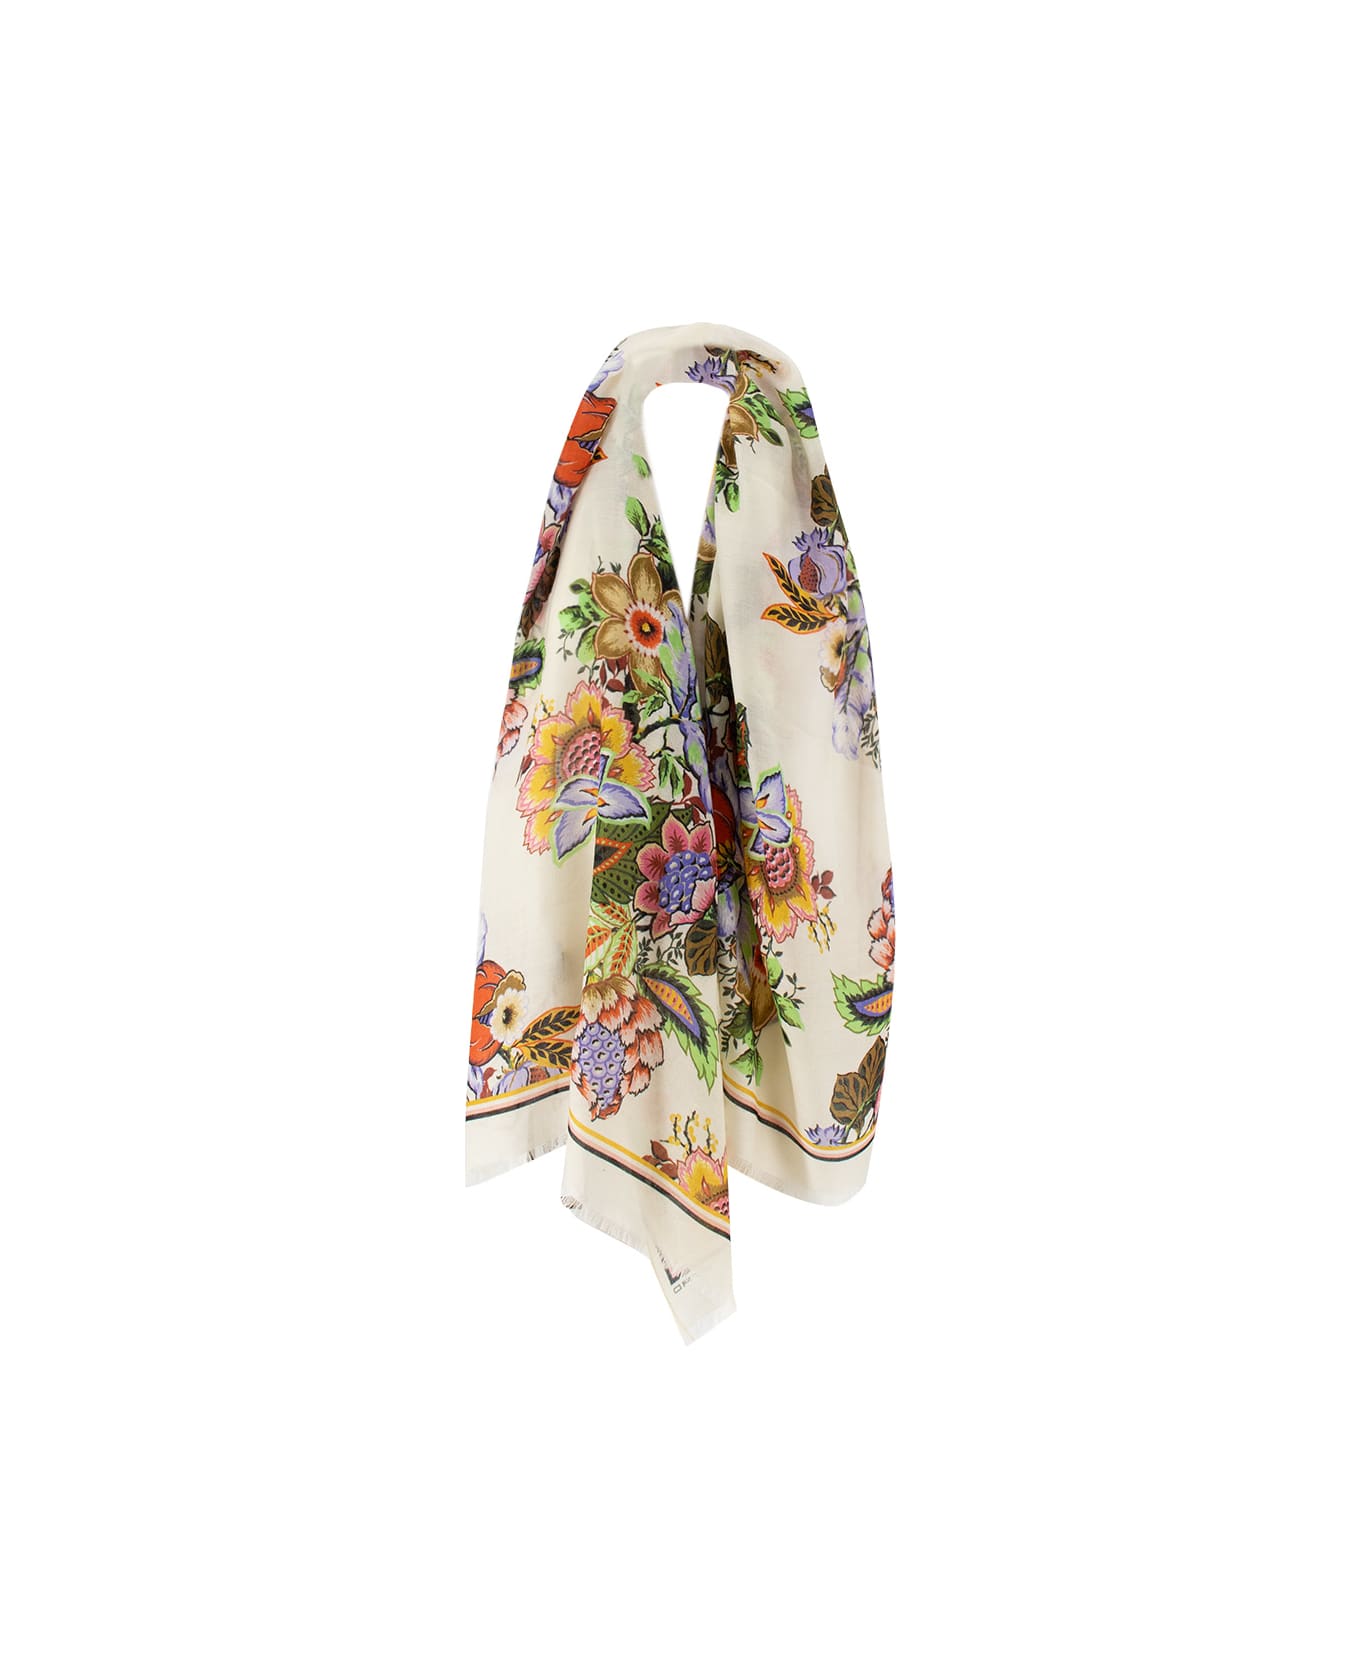 Etro Printed Cashmere And Silk Scarf - PRINT ON WHITE BASE